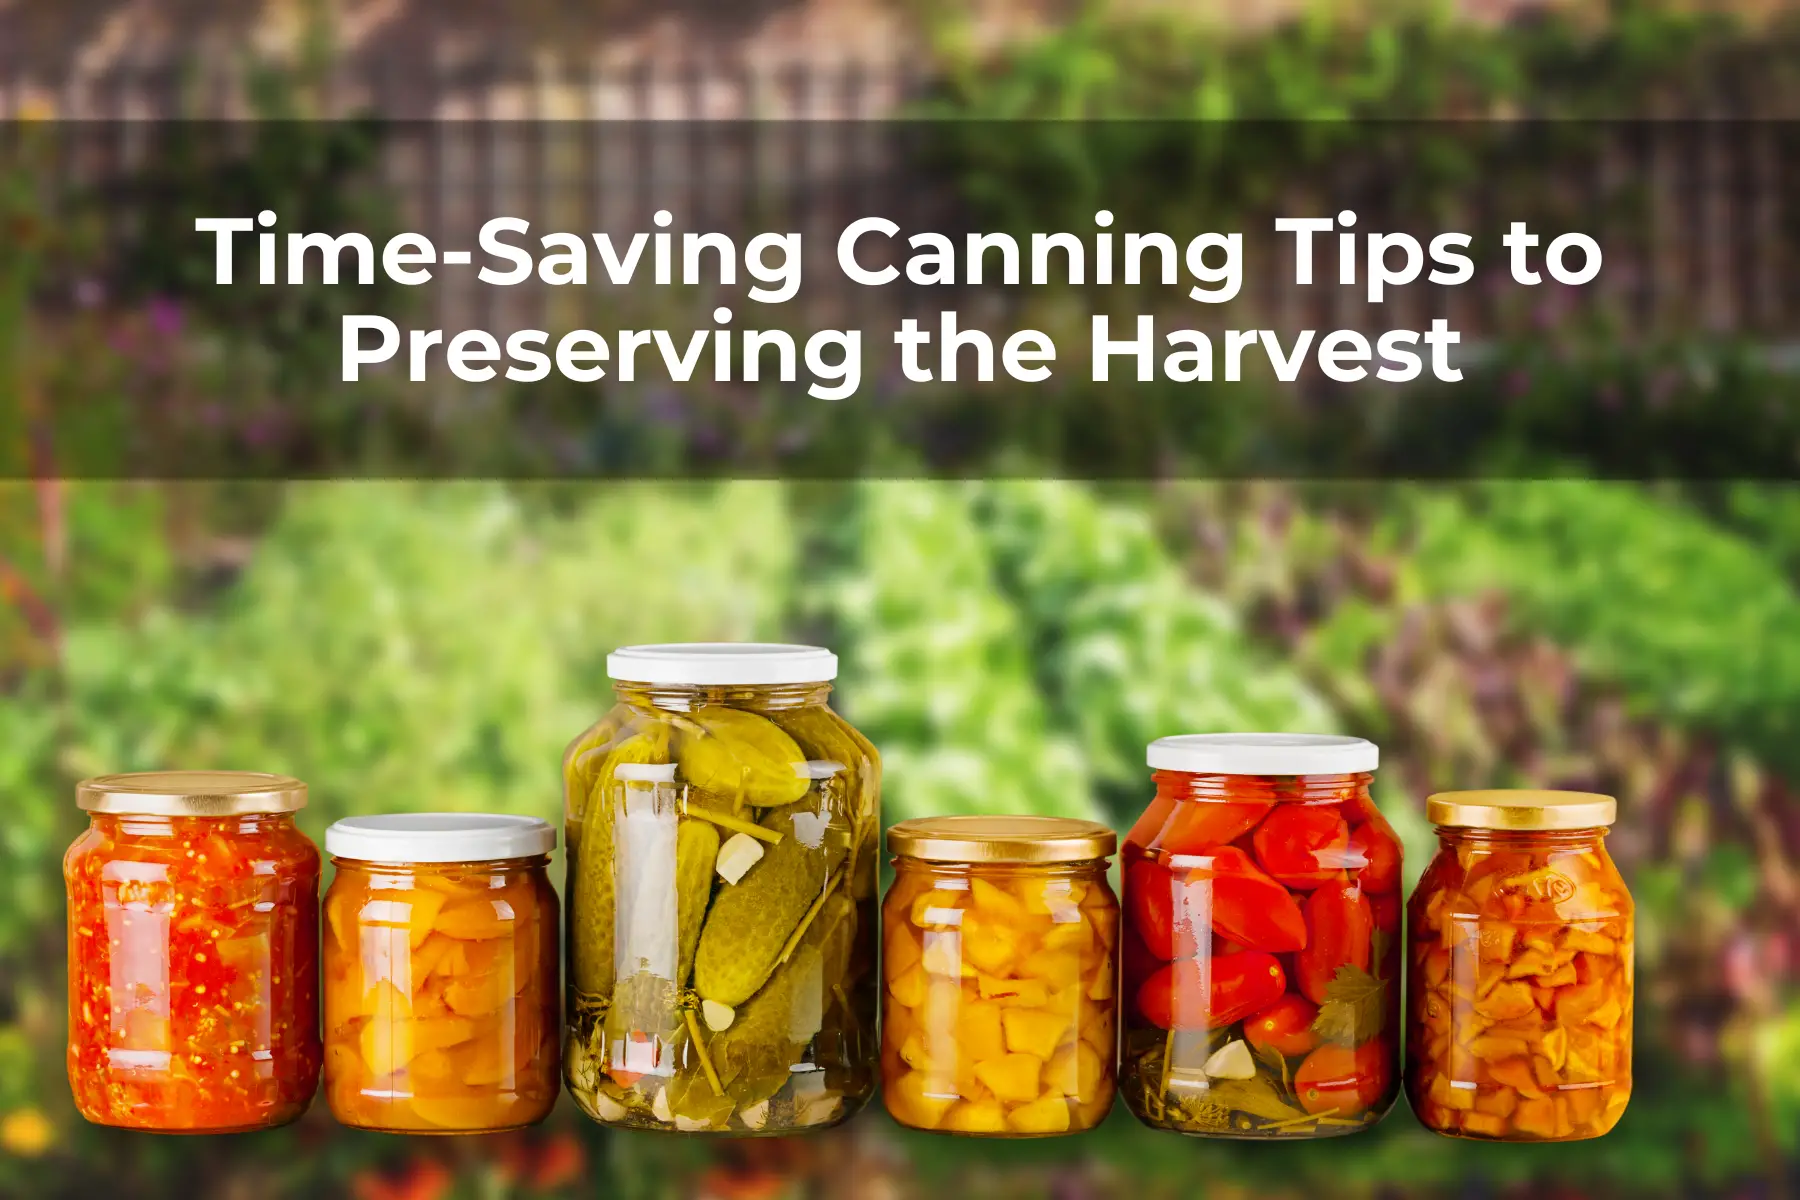 Time-Saving Canning Tips to Preserving the Harvest